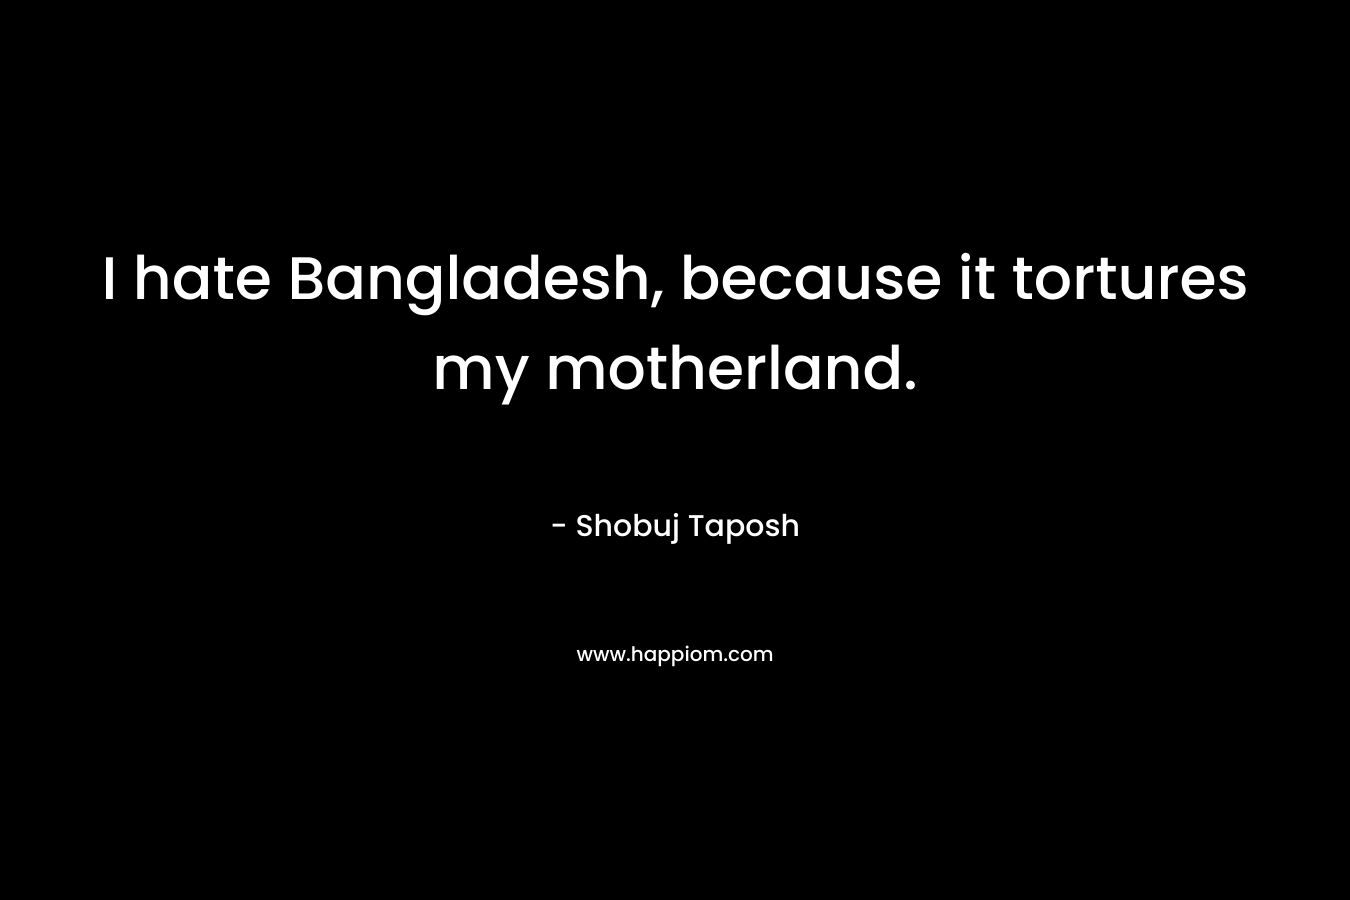 I hate Bangladesh, because it tortures my motherland.